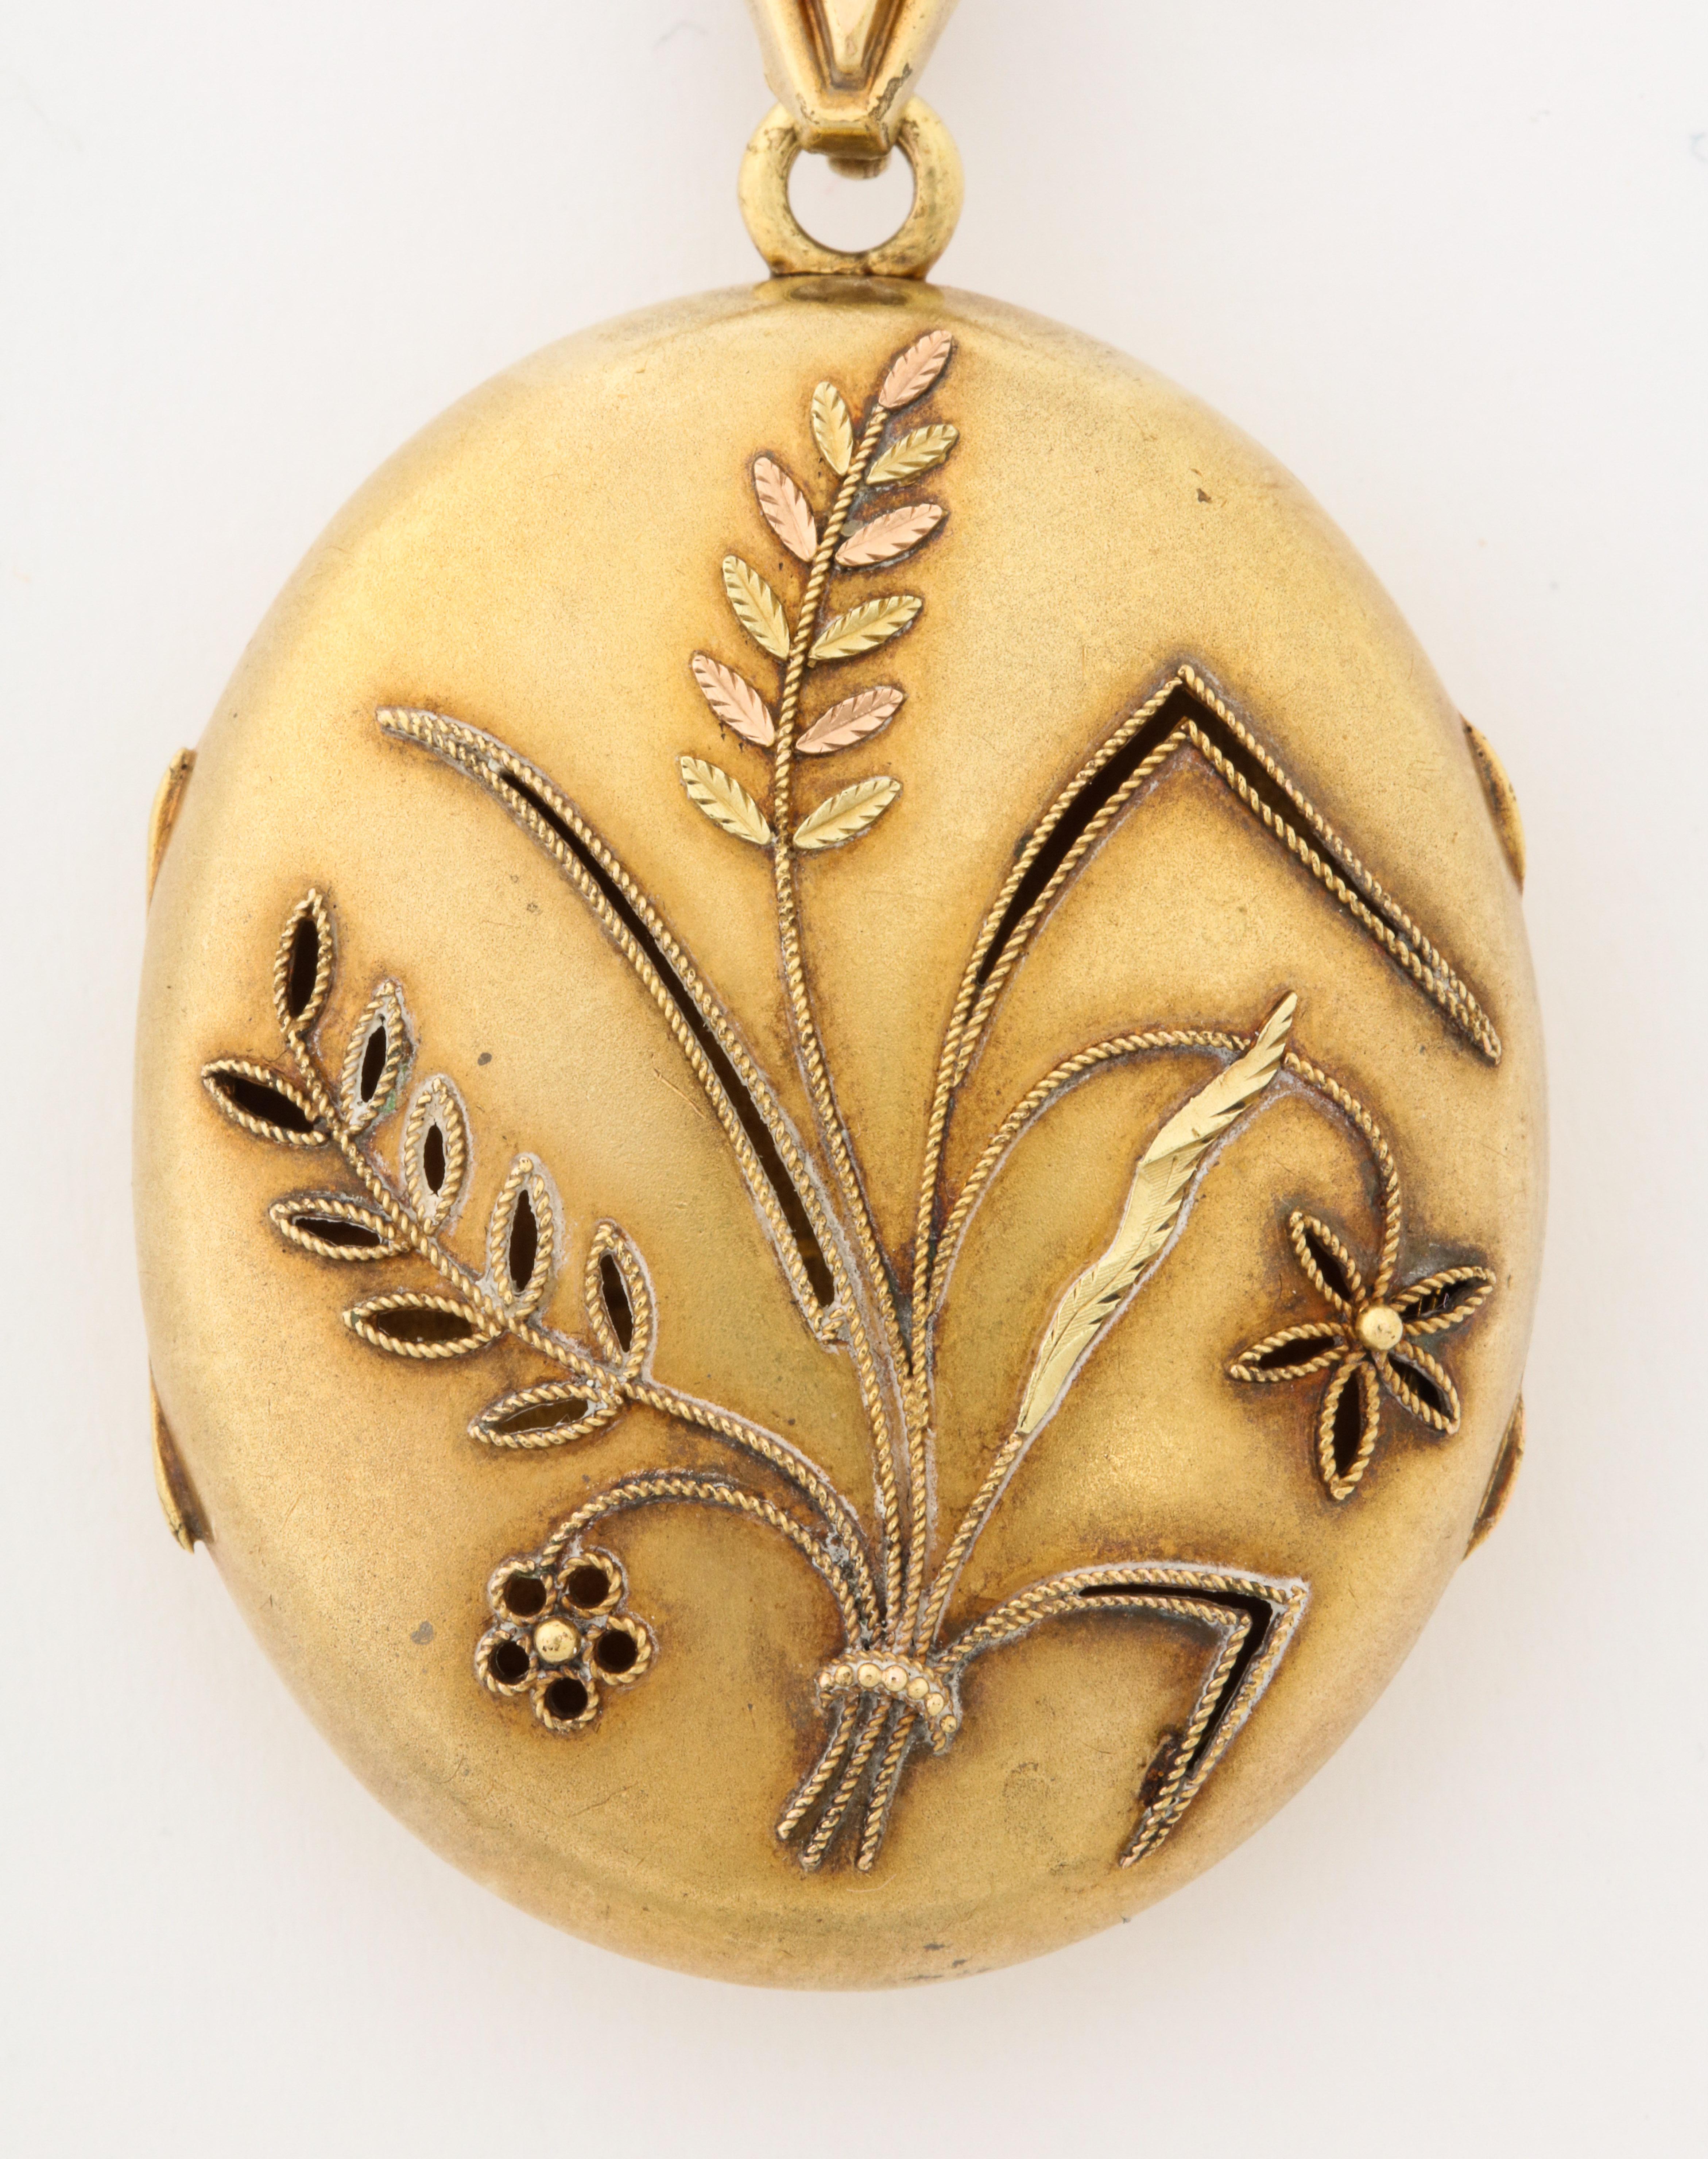 A lovely large oval 18K gold locket/vinaigrette with repousse sheaves of wheat. symbolizing fertility or productiveness. It has its original bale and is in very good 
condition.